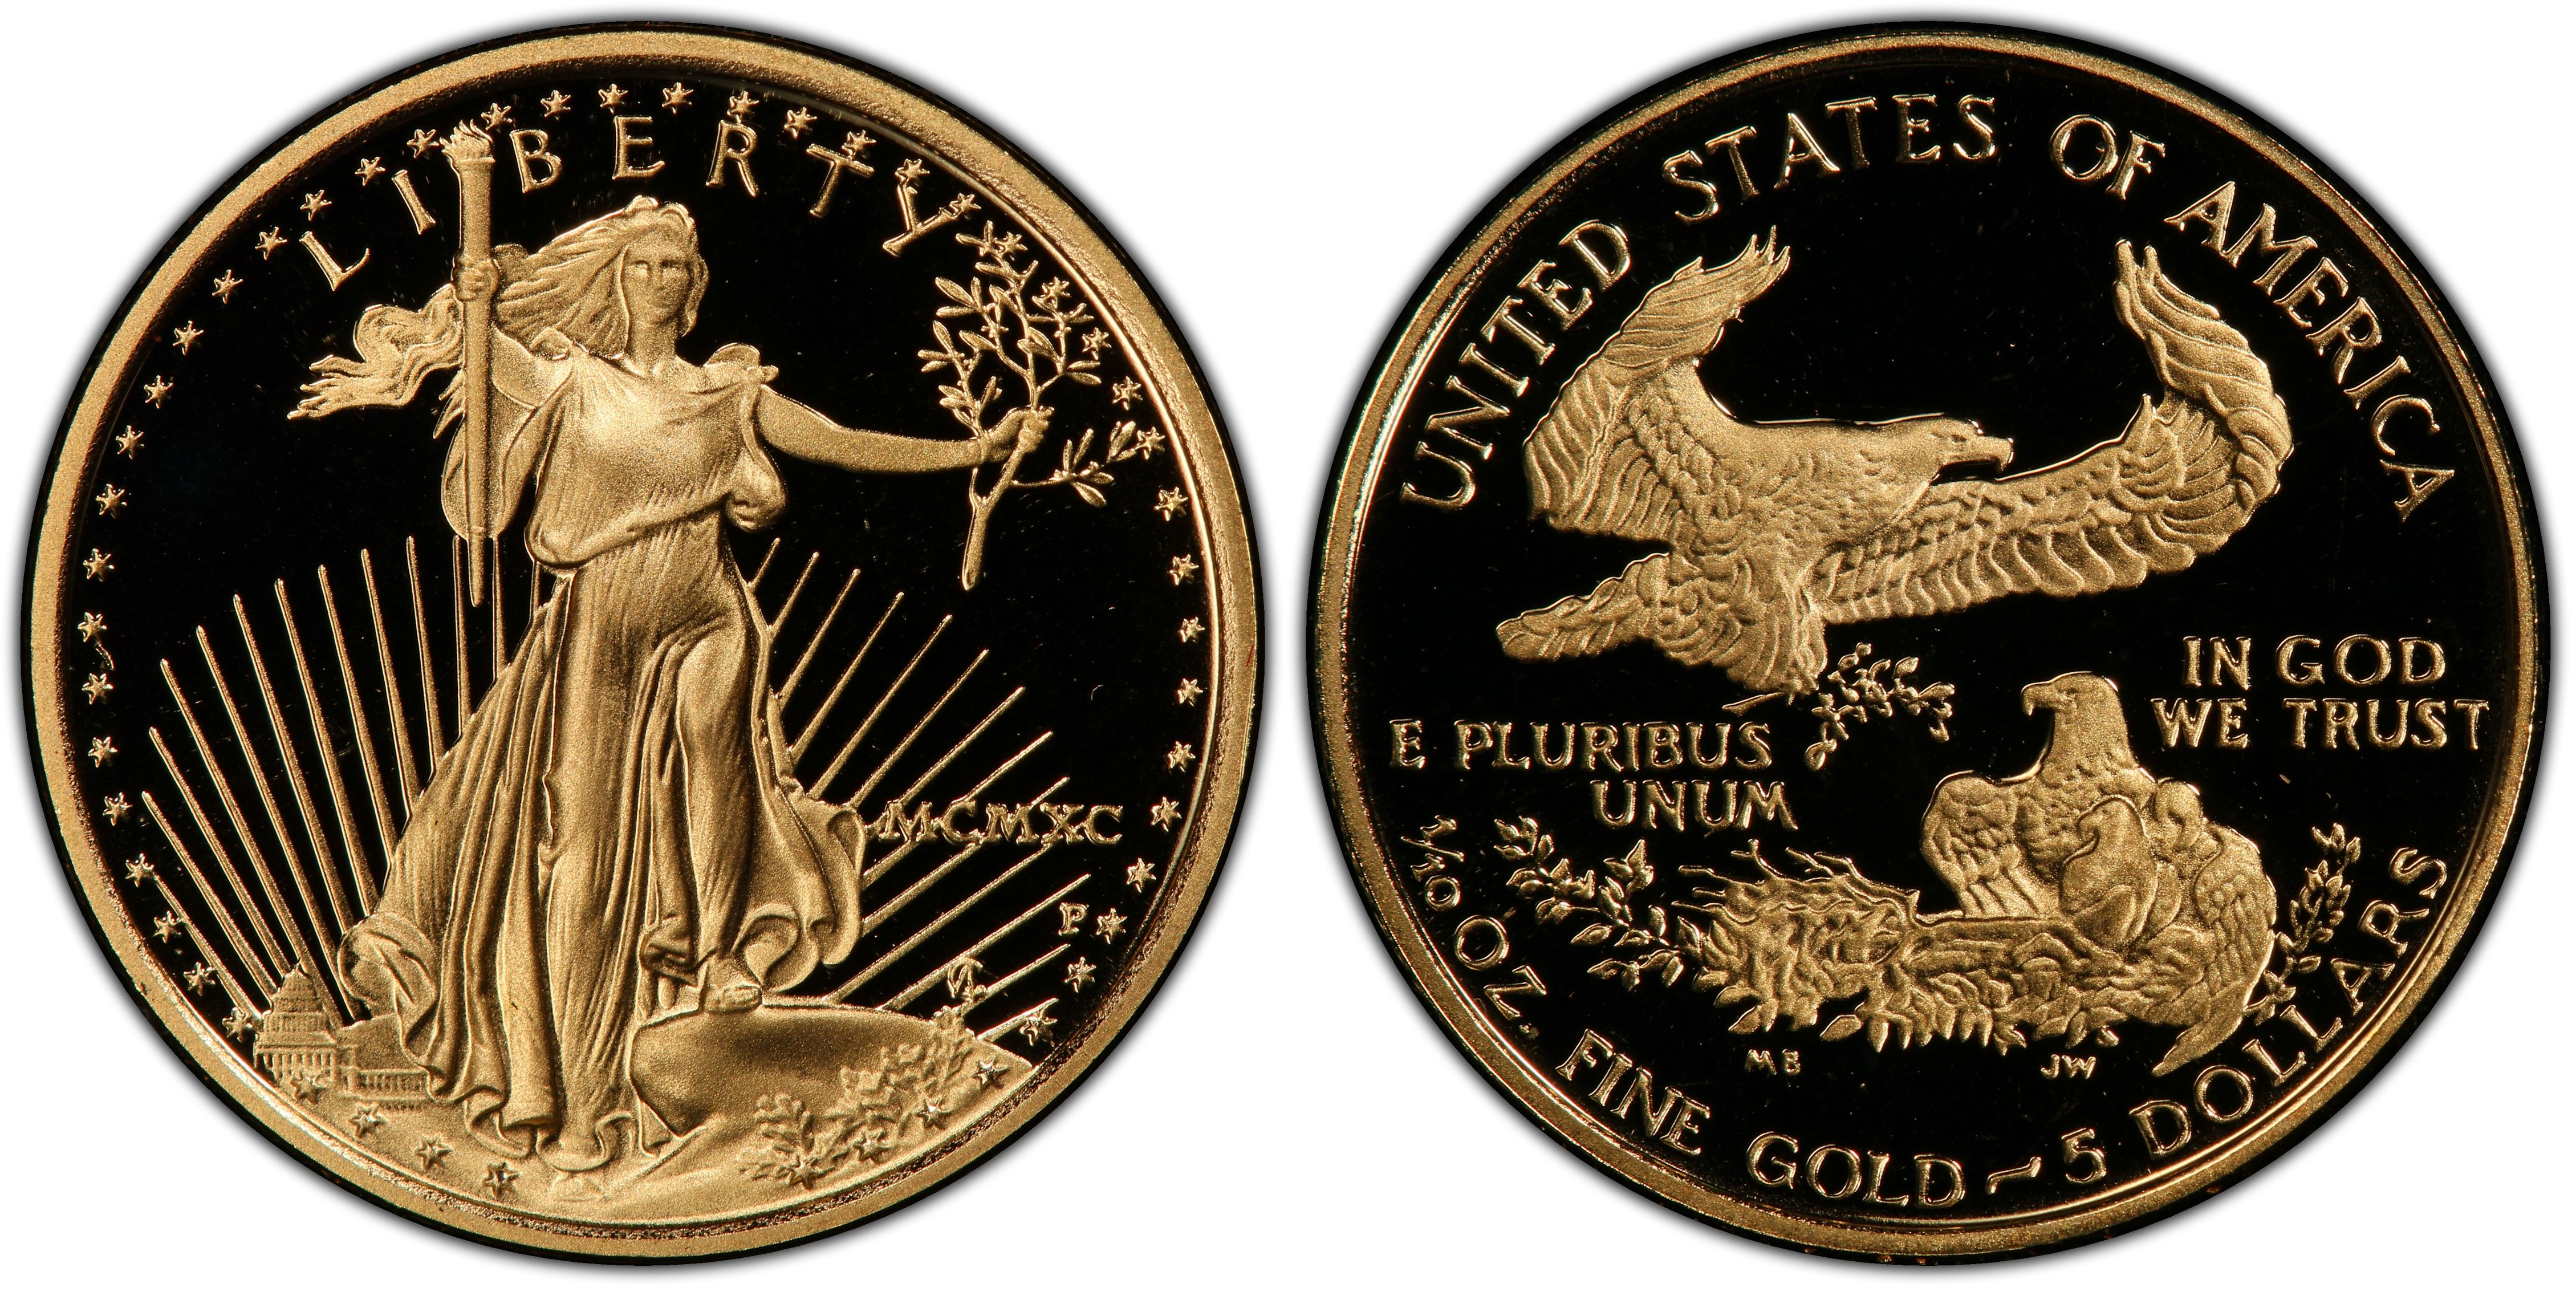 1990-P $5 Gold Eagle, DCAM (Proof) Gold Eagles - PCGS CoinFacts